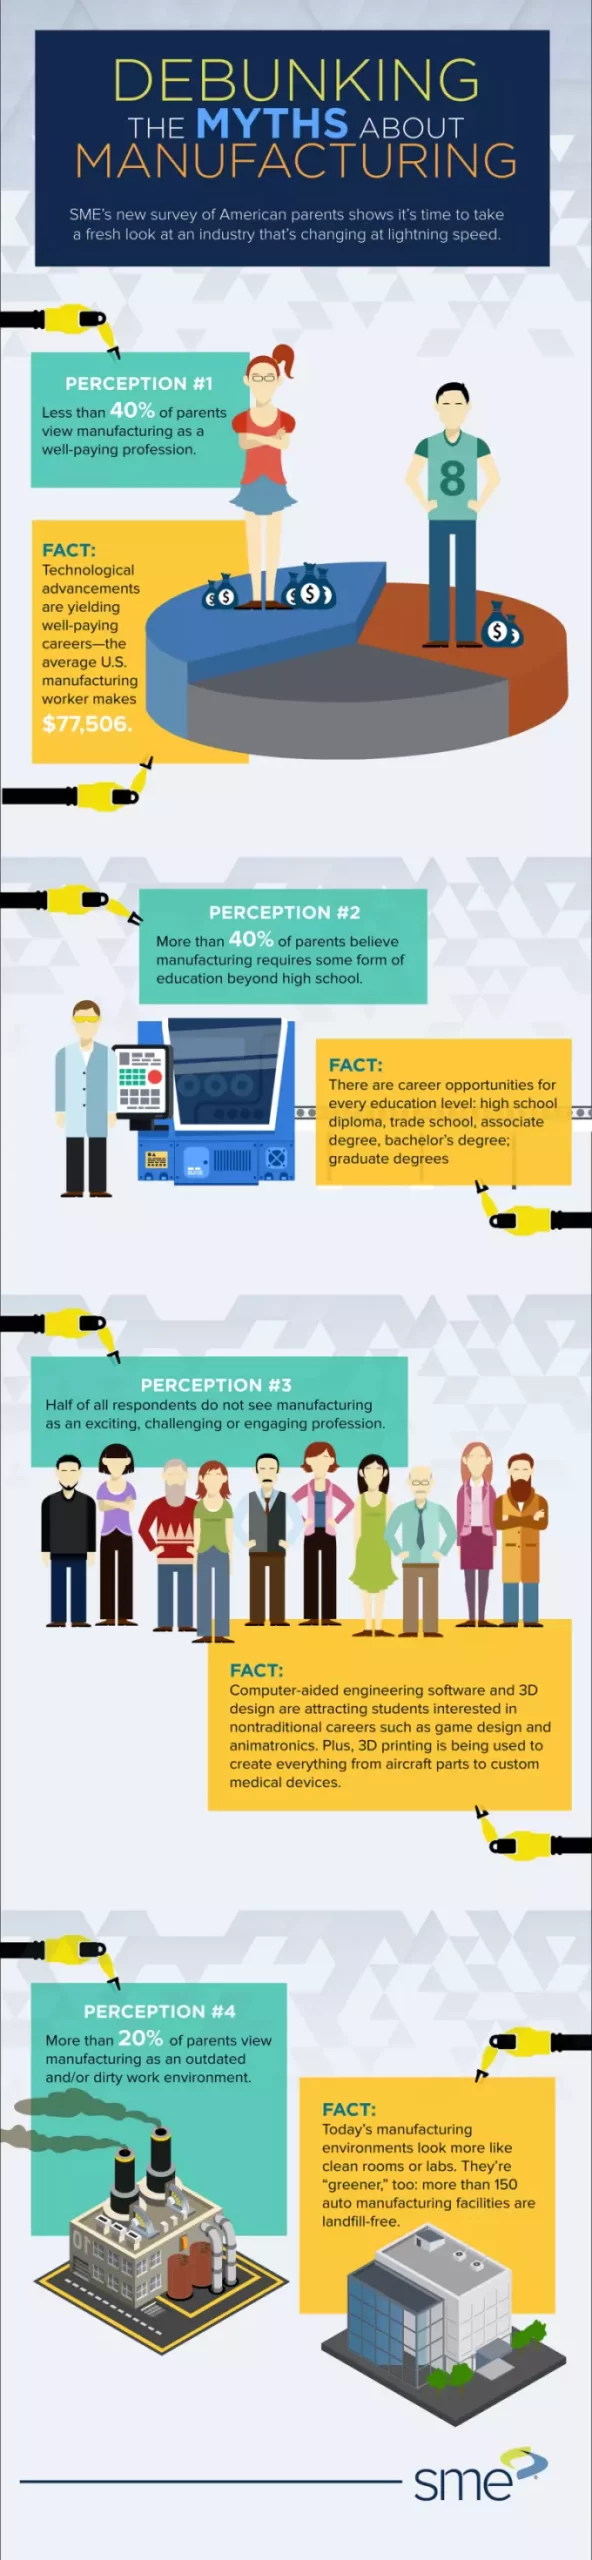 infographic-debunking-myths-about-manufacturing-scaled.webp